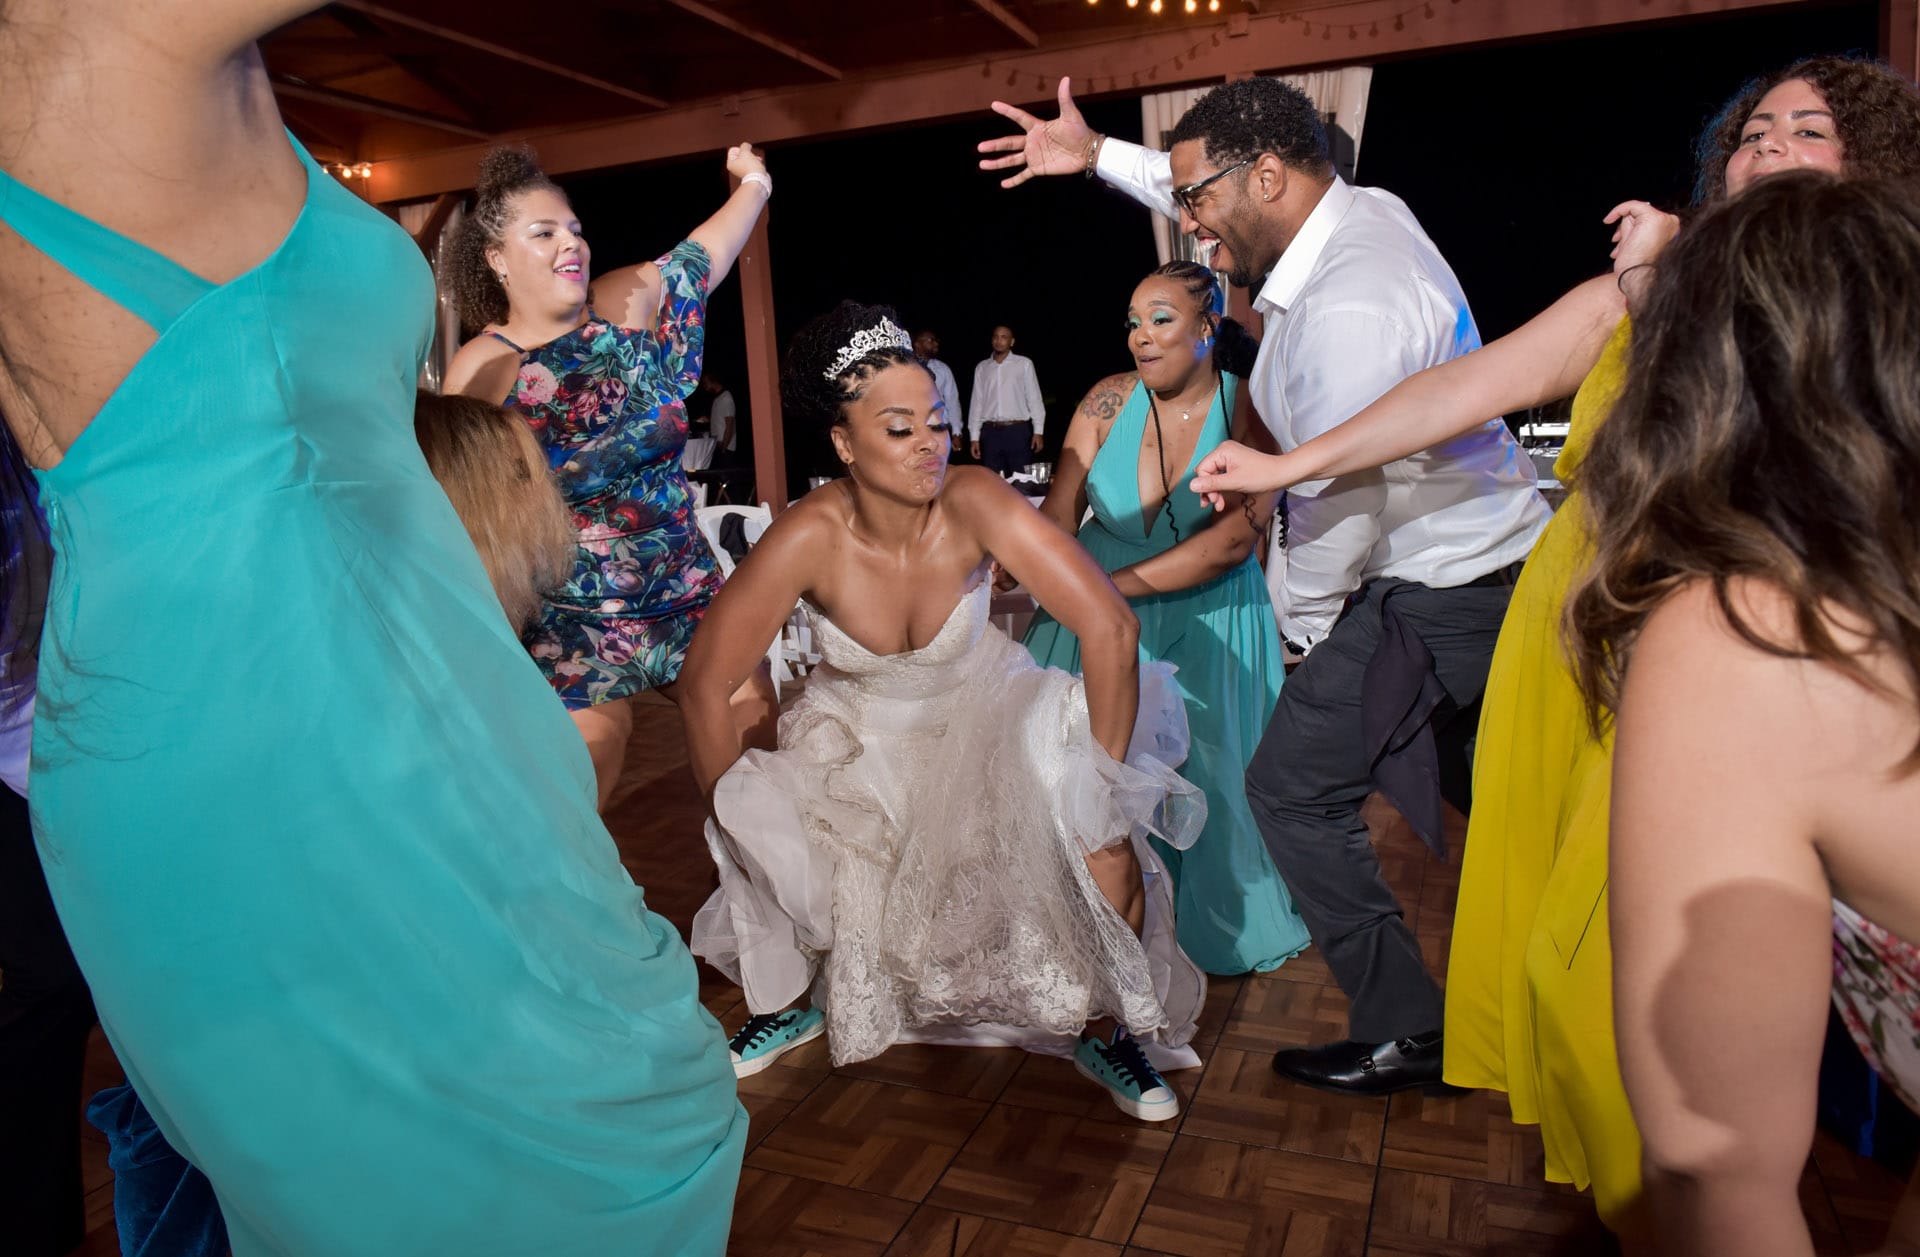 A bride takes the dance floor by storm after during her wedding reception at Fox Hills Golf Course in Plymouth, Michigan.